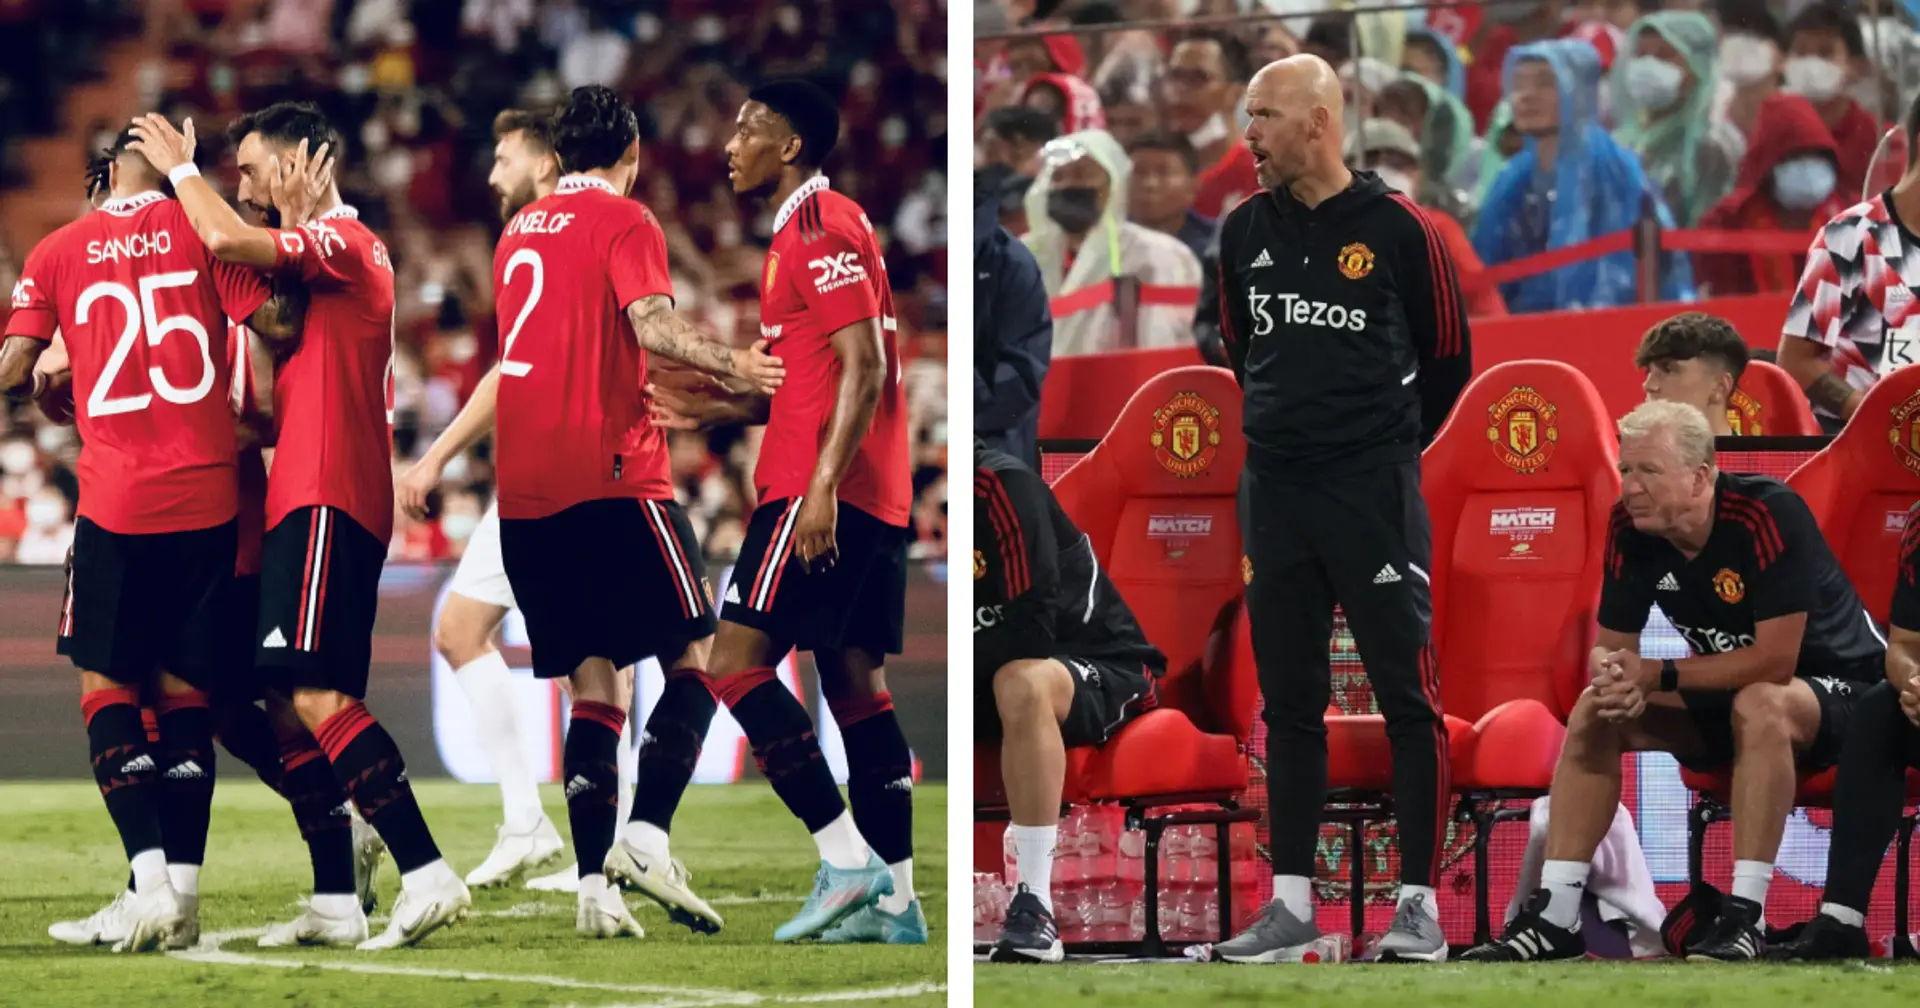 'I don't care that it's a friendly, it's always great to beat Liverpool': Man United fans react to first pre-season game